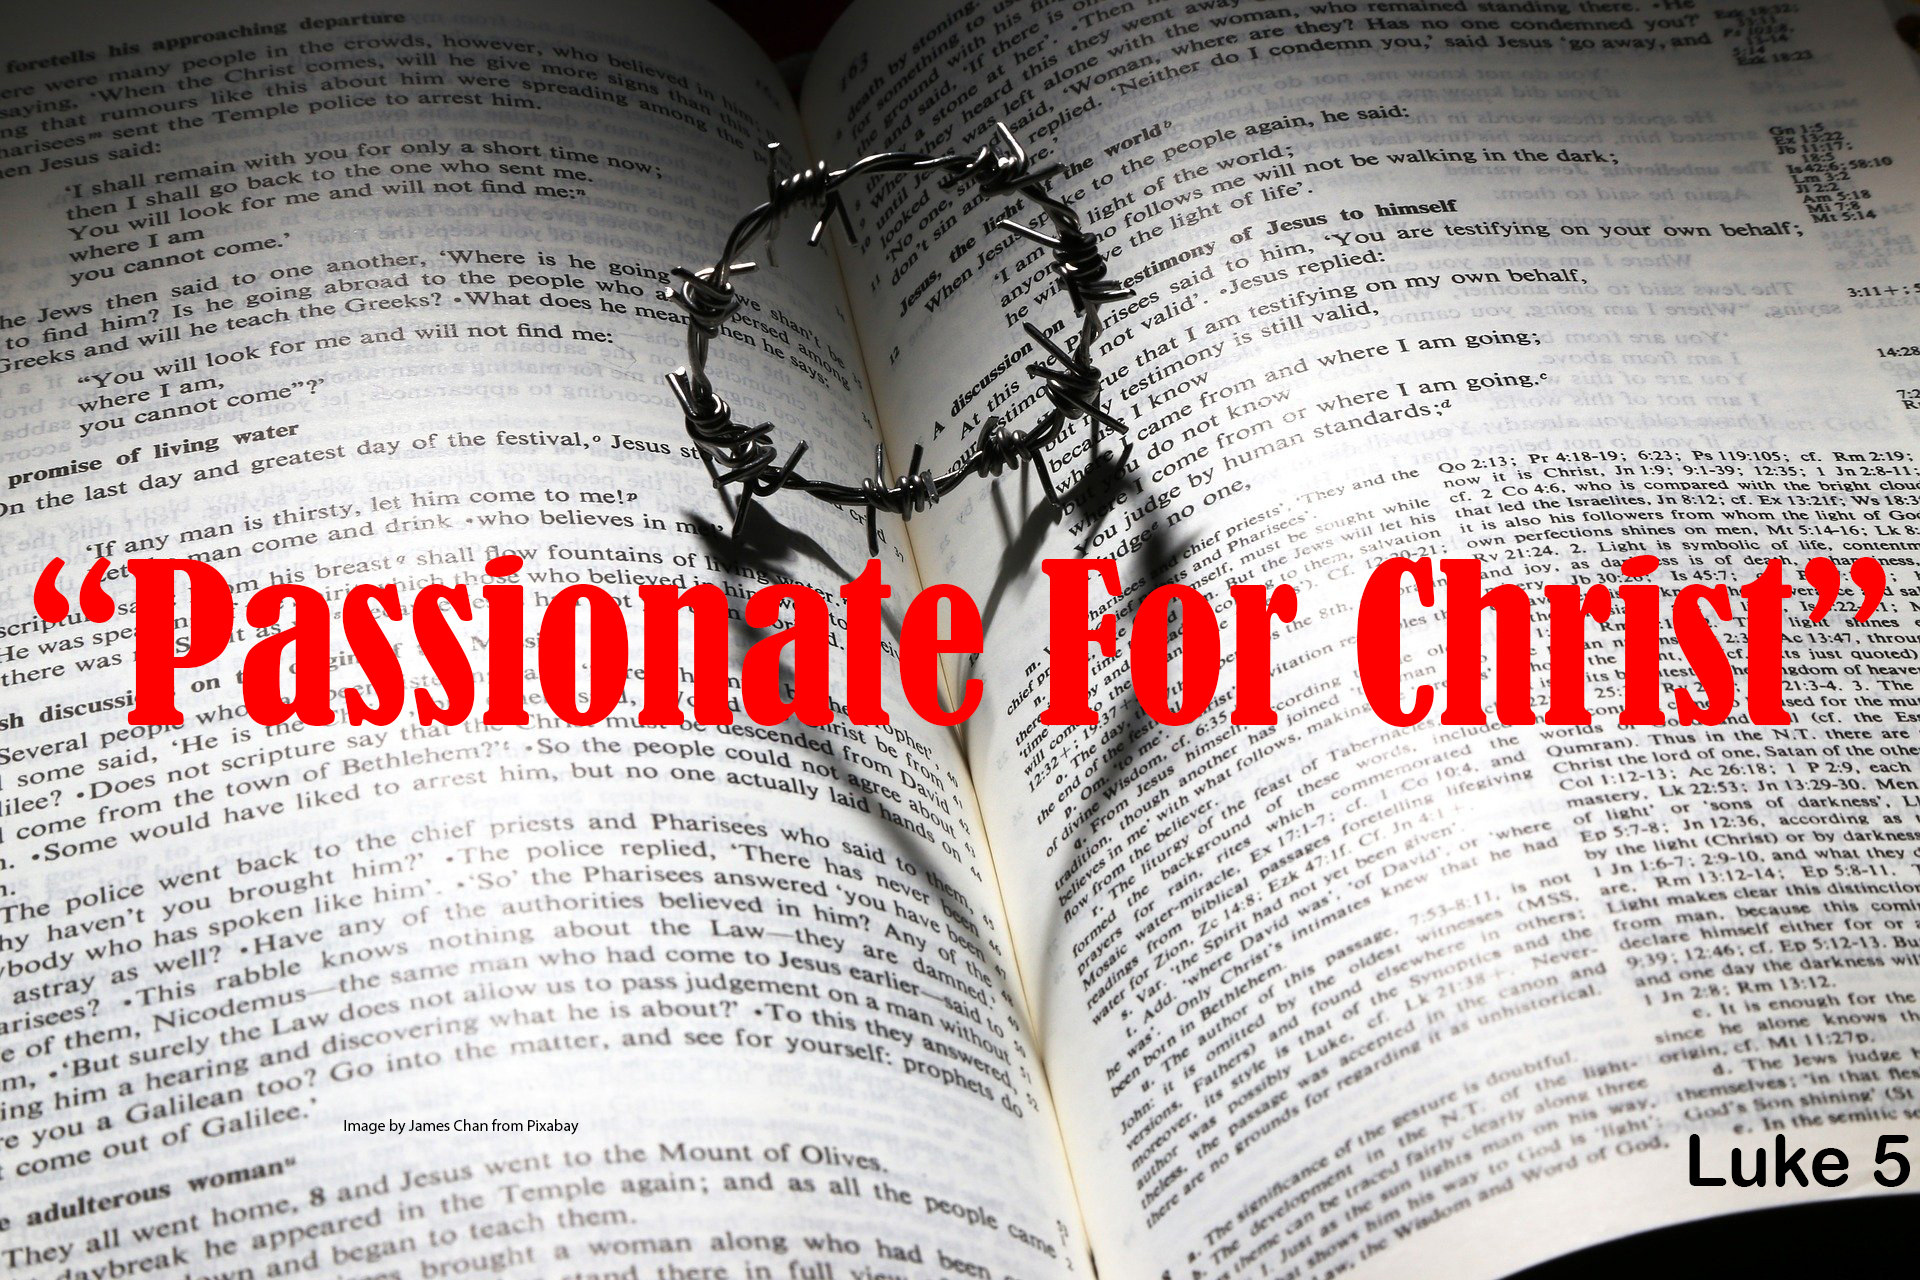 “Passionate For Christ”